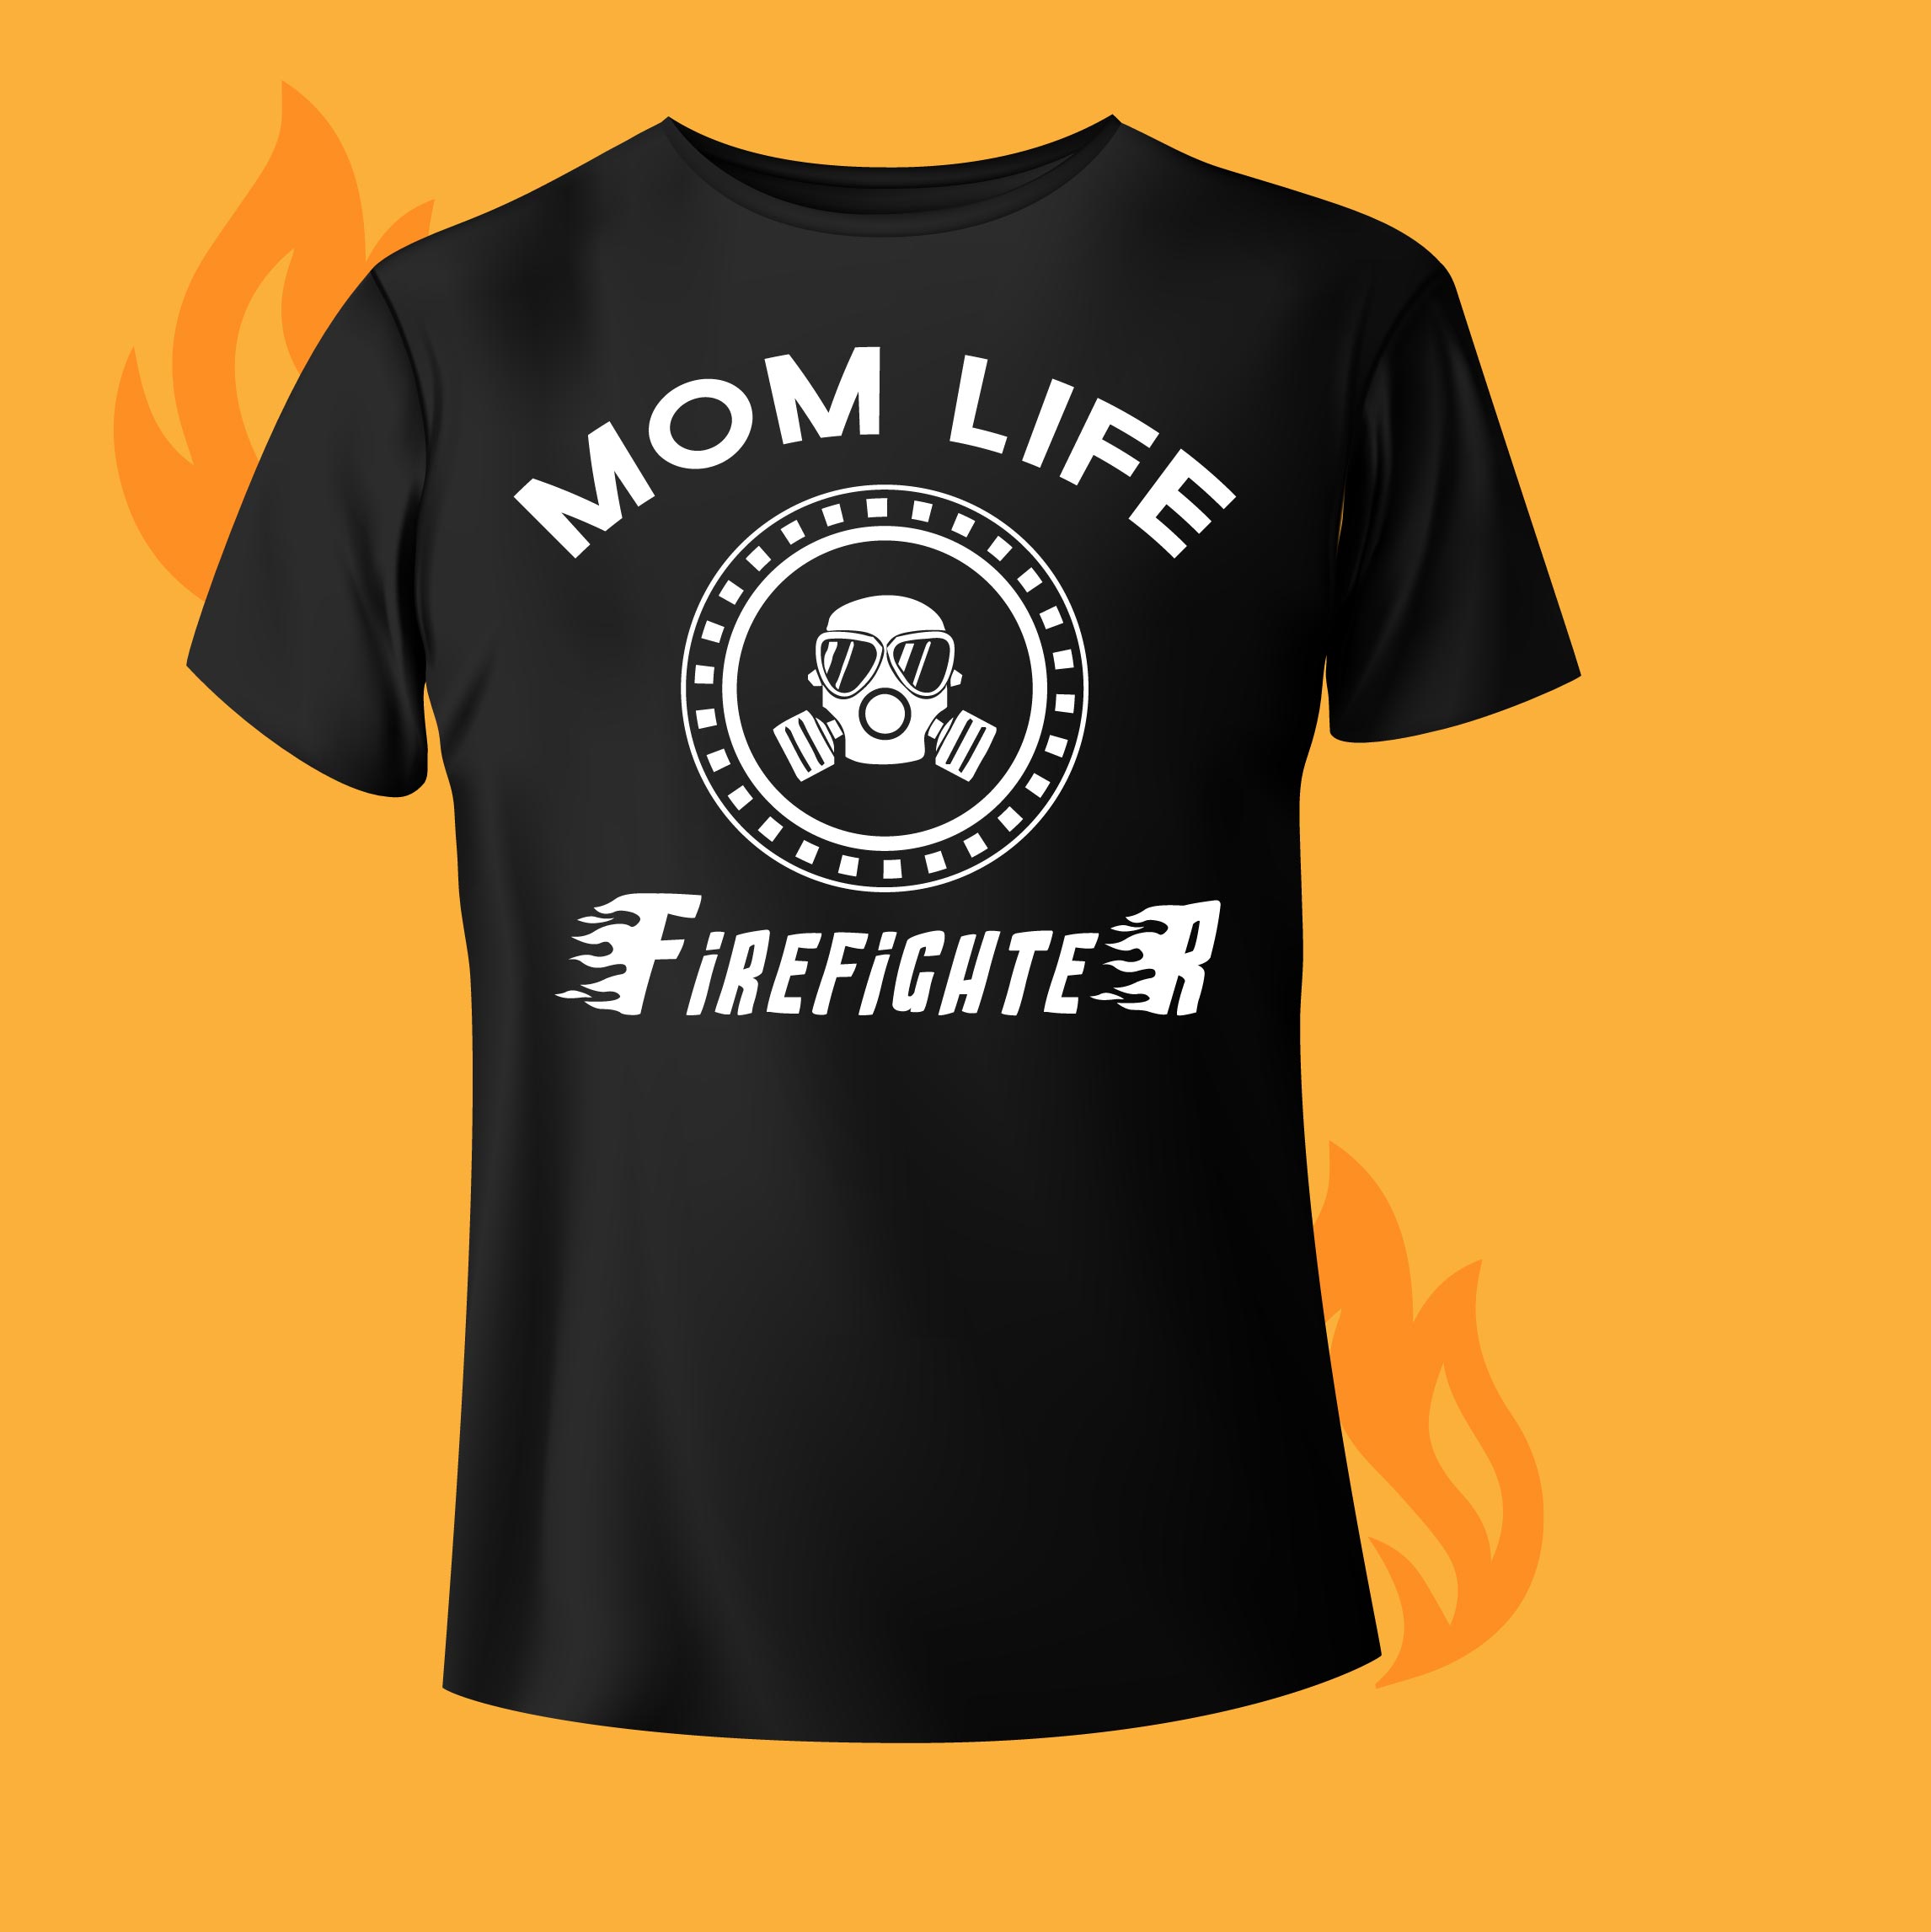 T - shirt with the words mom life on it.